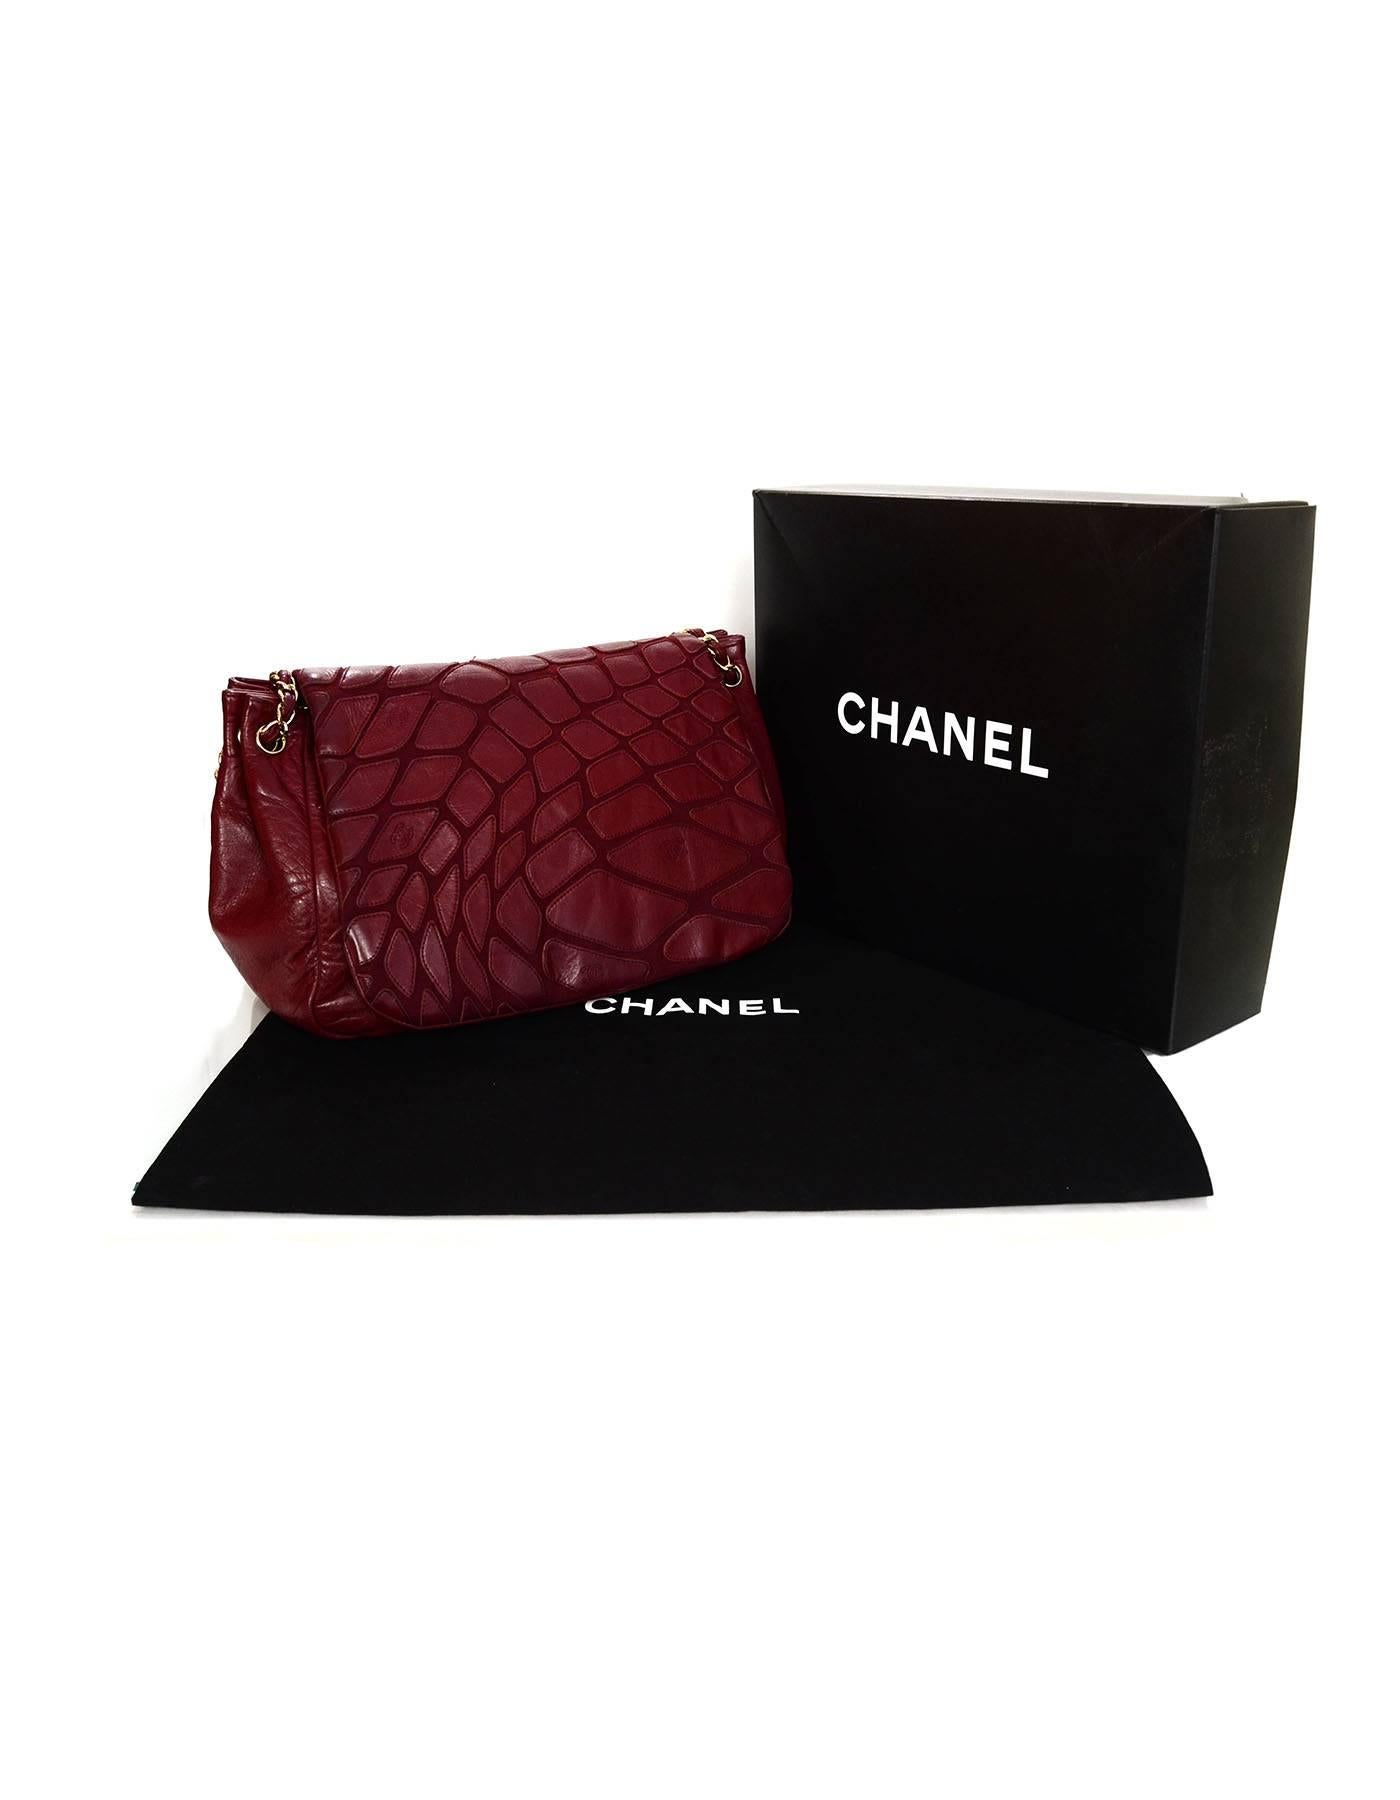 Chanel Red Leather Scales Accordion Flap Bag rt. $2, 800 4